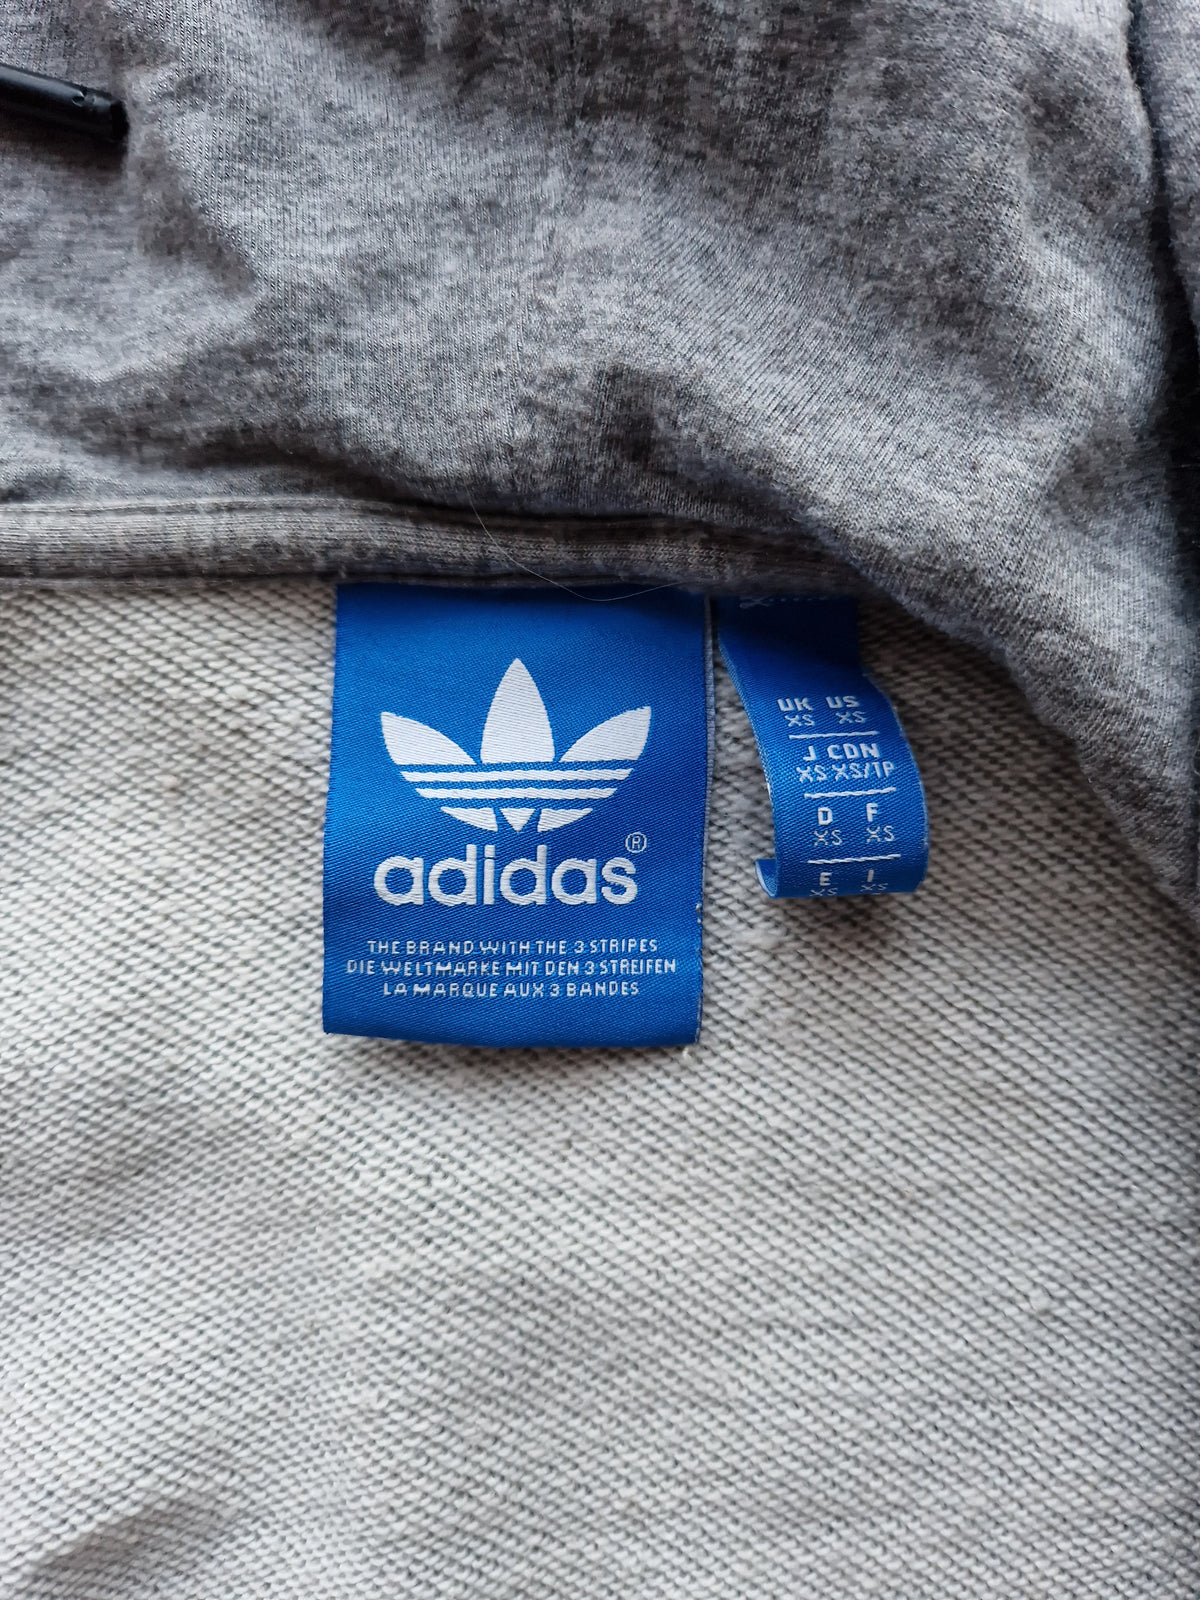 Adidas Zip Up Hoodie - Size Small